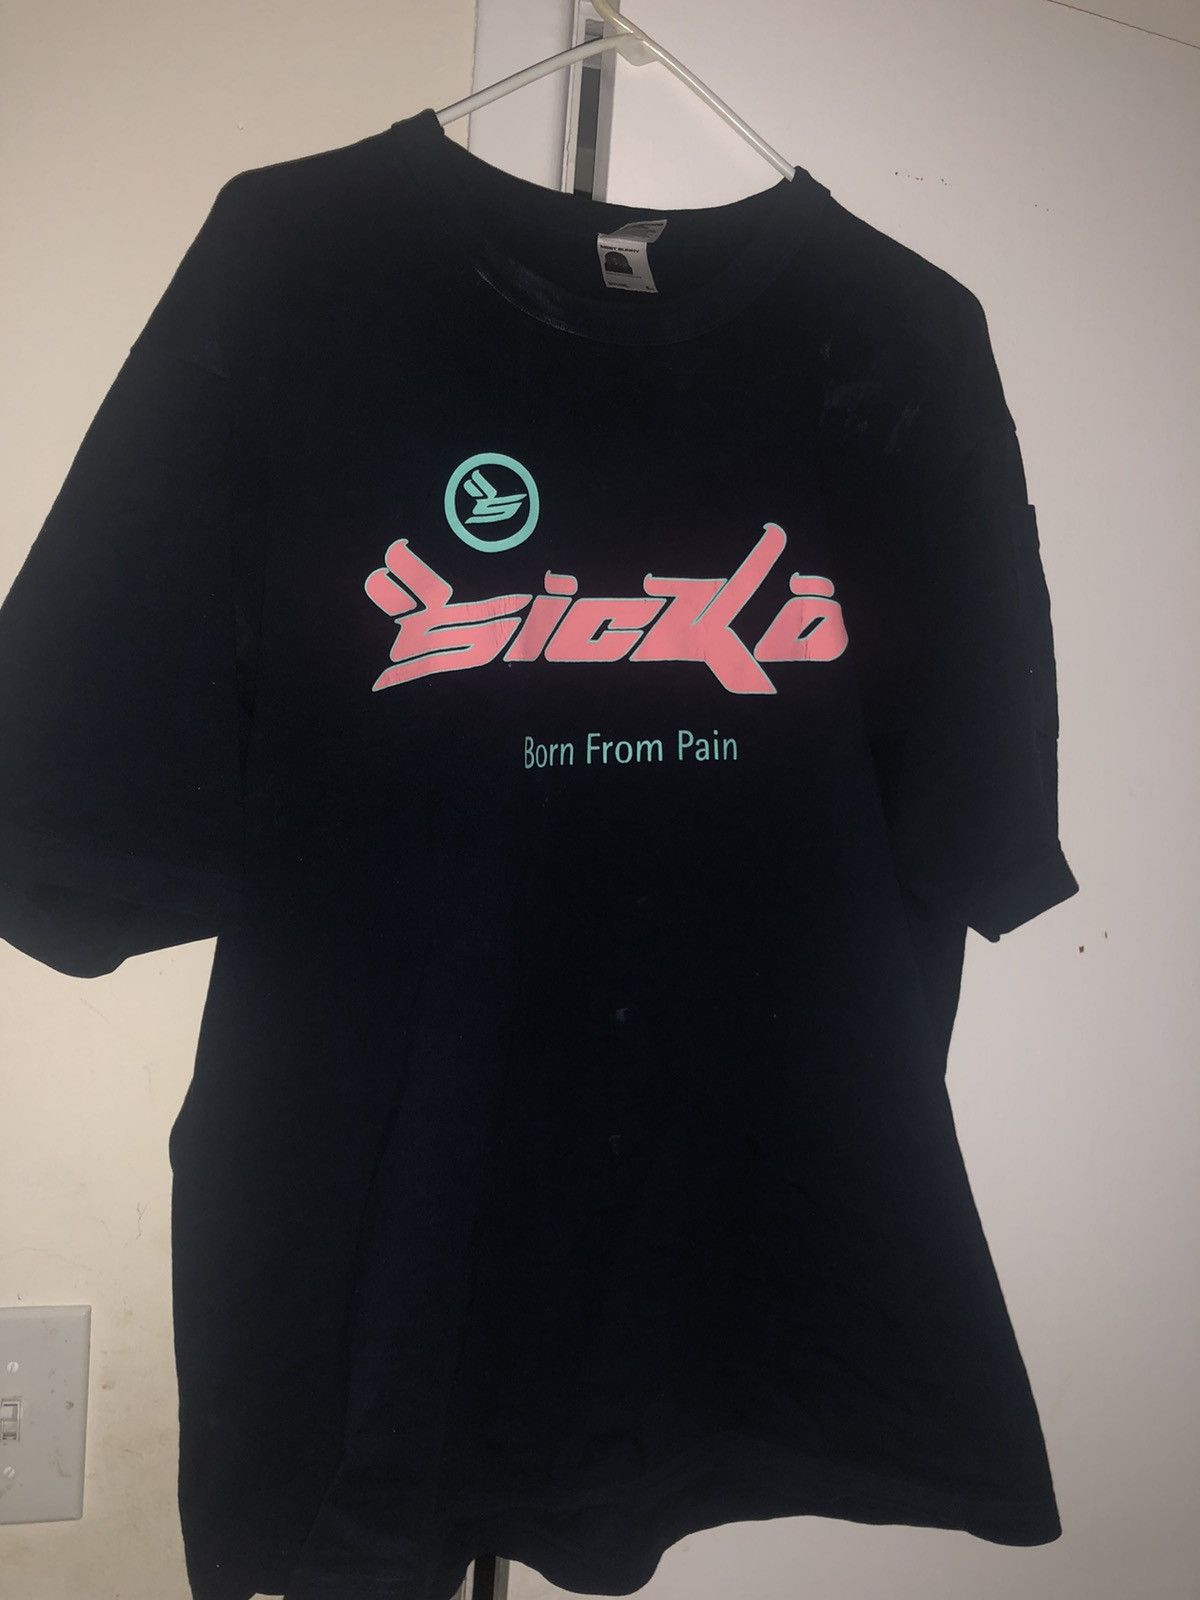 Other Born From Pain Sicko Tee**FINAL PRICE DROP** | Grailed